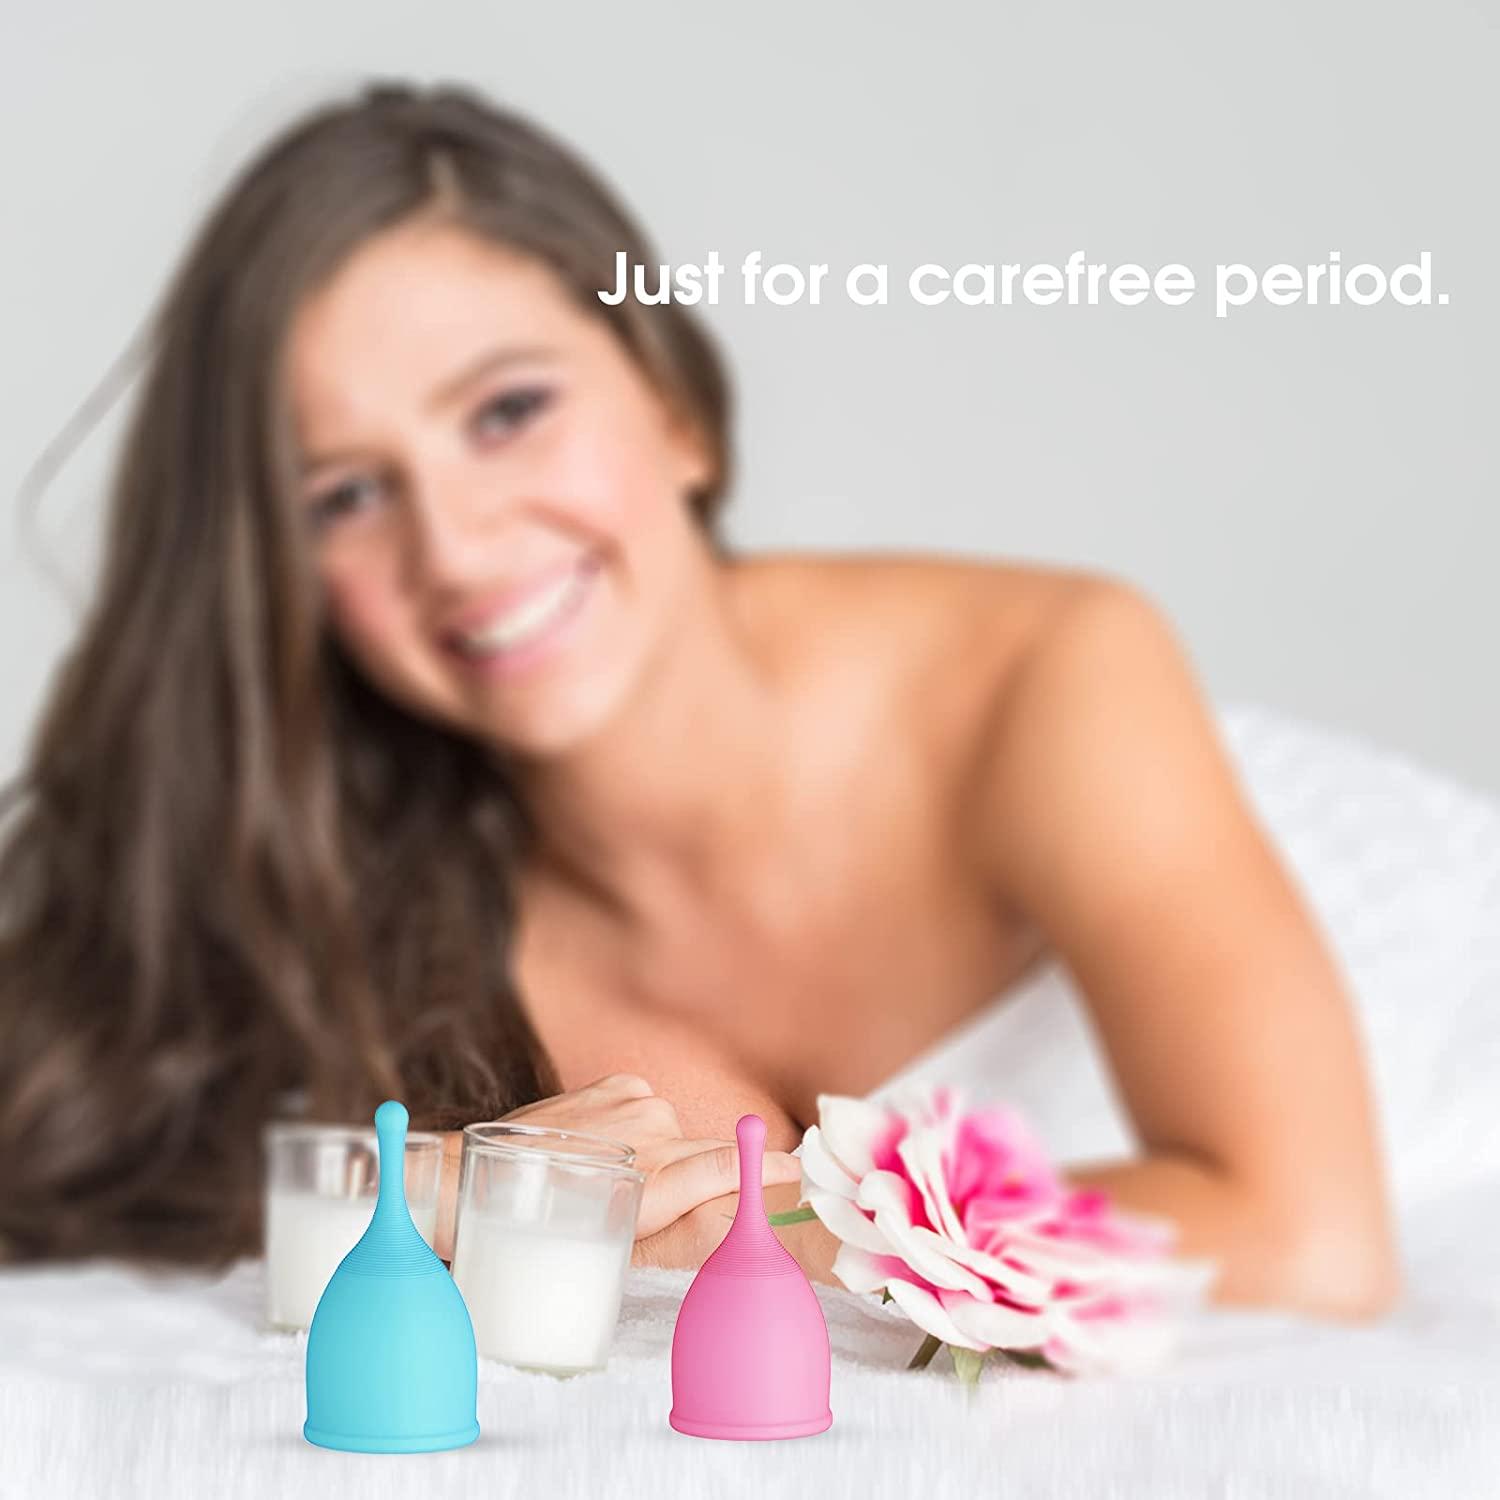 The Happy Girl Cup ™, Menstrual Cup, simple, economical and eco-friendly